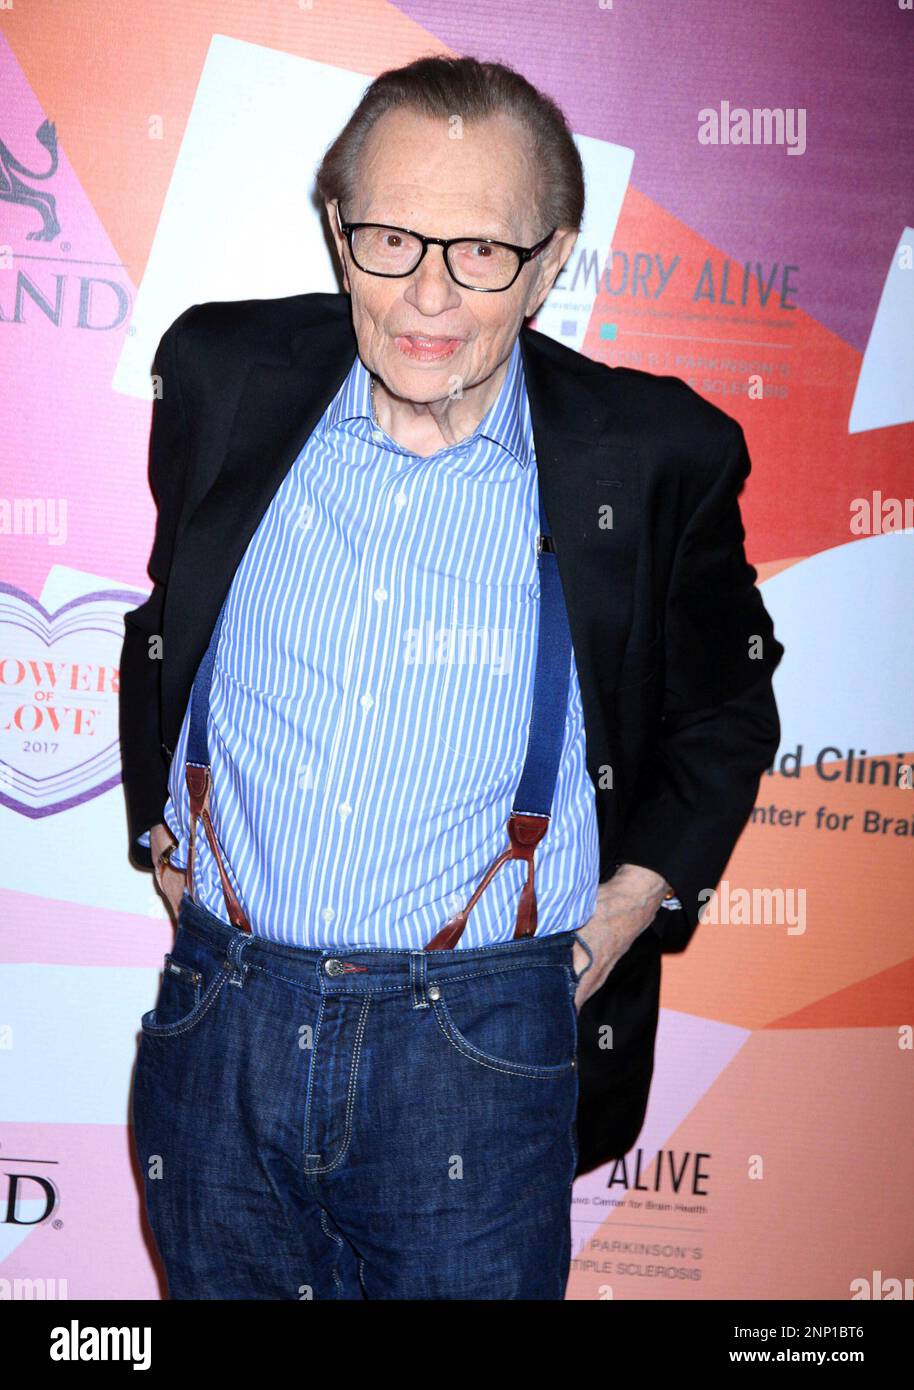 In pictures: Legendary talk-show host Larry King